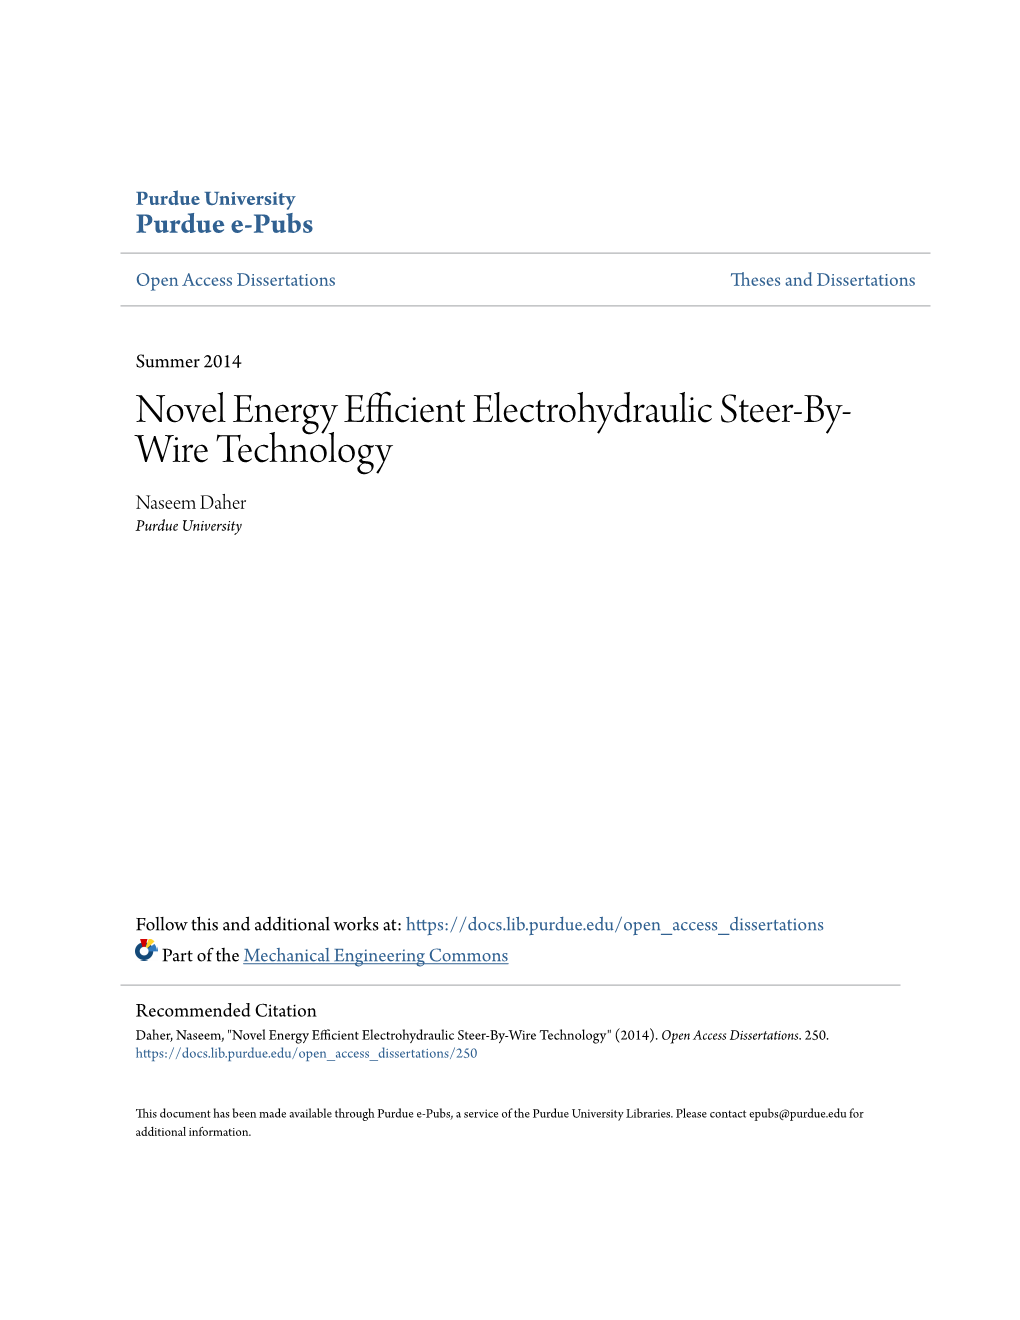 Novel Energy Efficient Electrohydraulic Steer-By-Wire Technology" (2014)